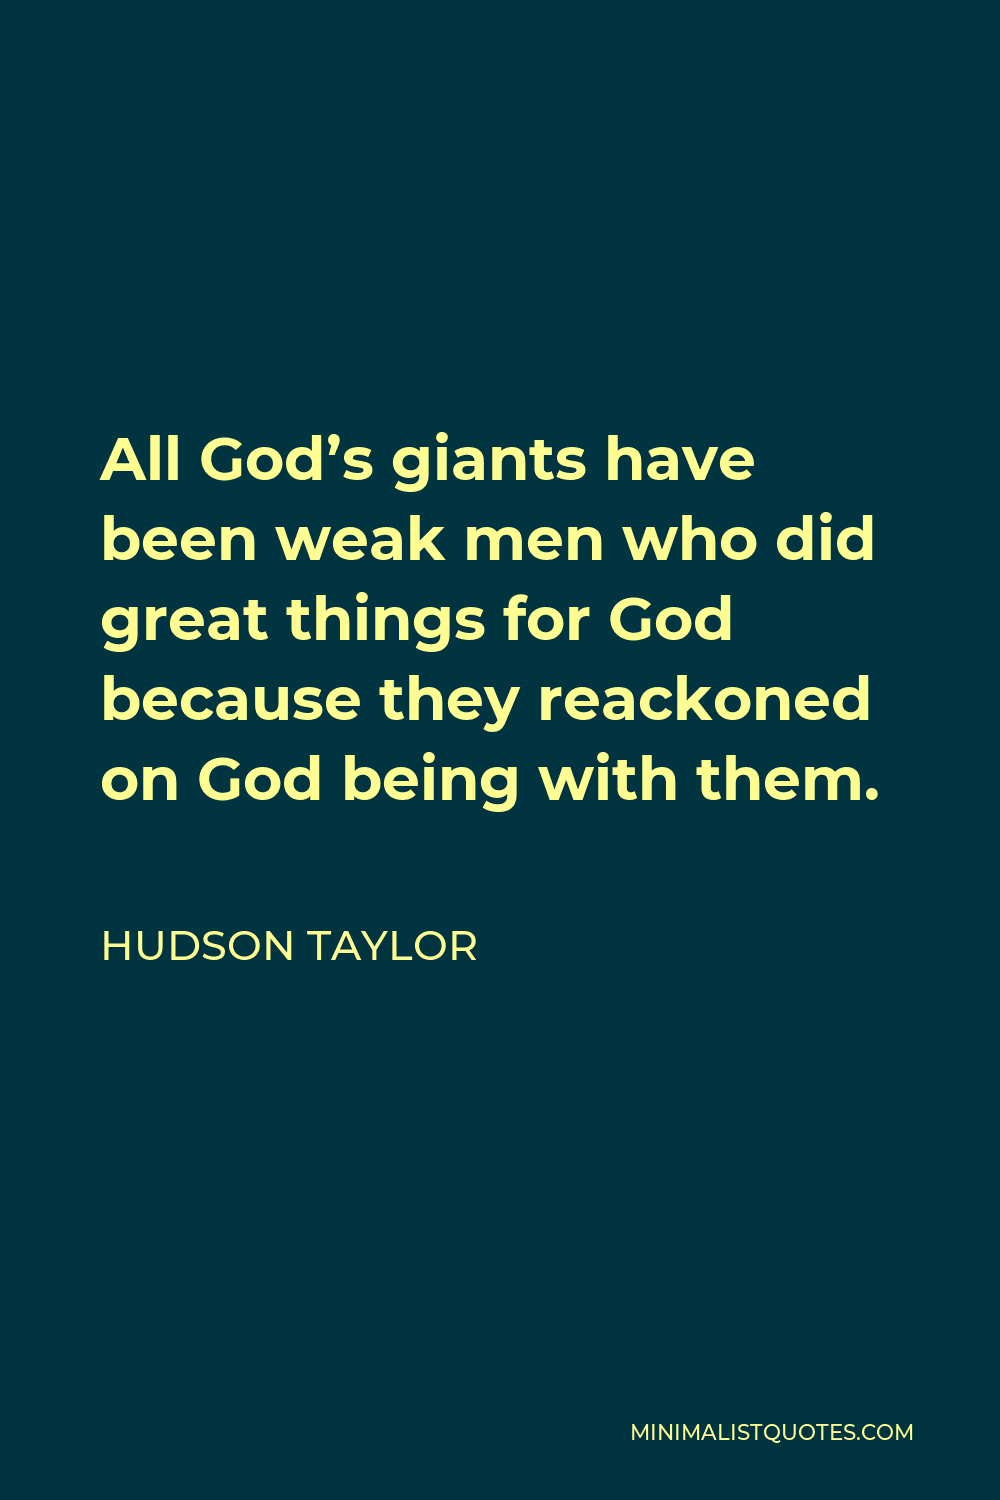 Hudson Taylor Quote - All God’s giants have been weak men who did great things for God because they reackoned on God being with them.